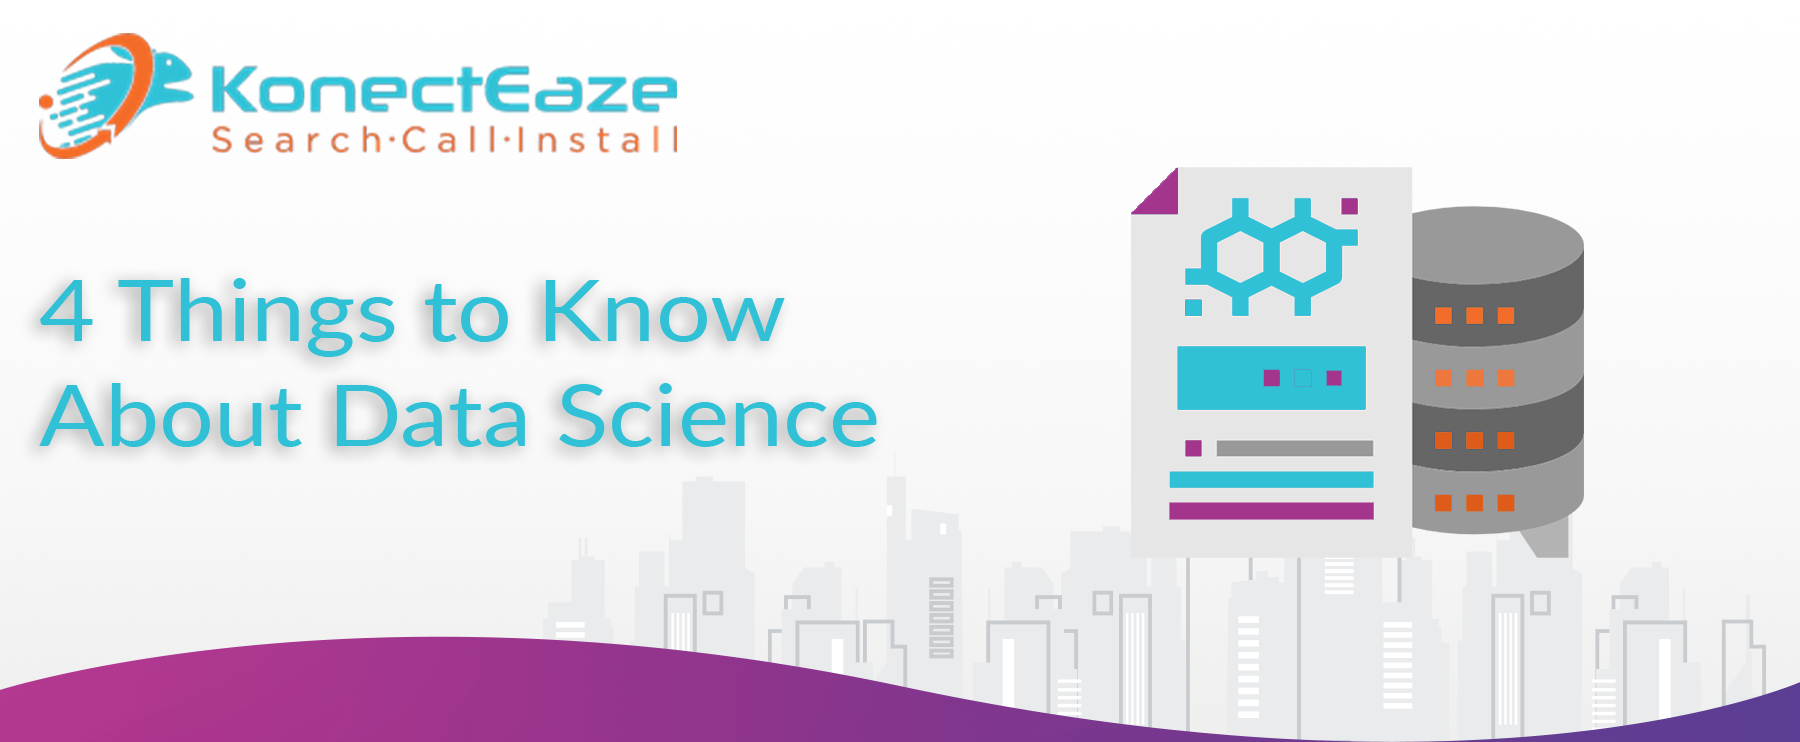 4 Things to Know About Data Science